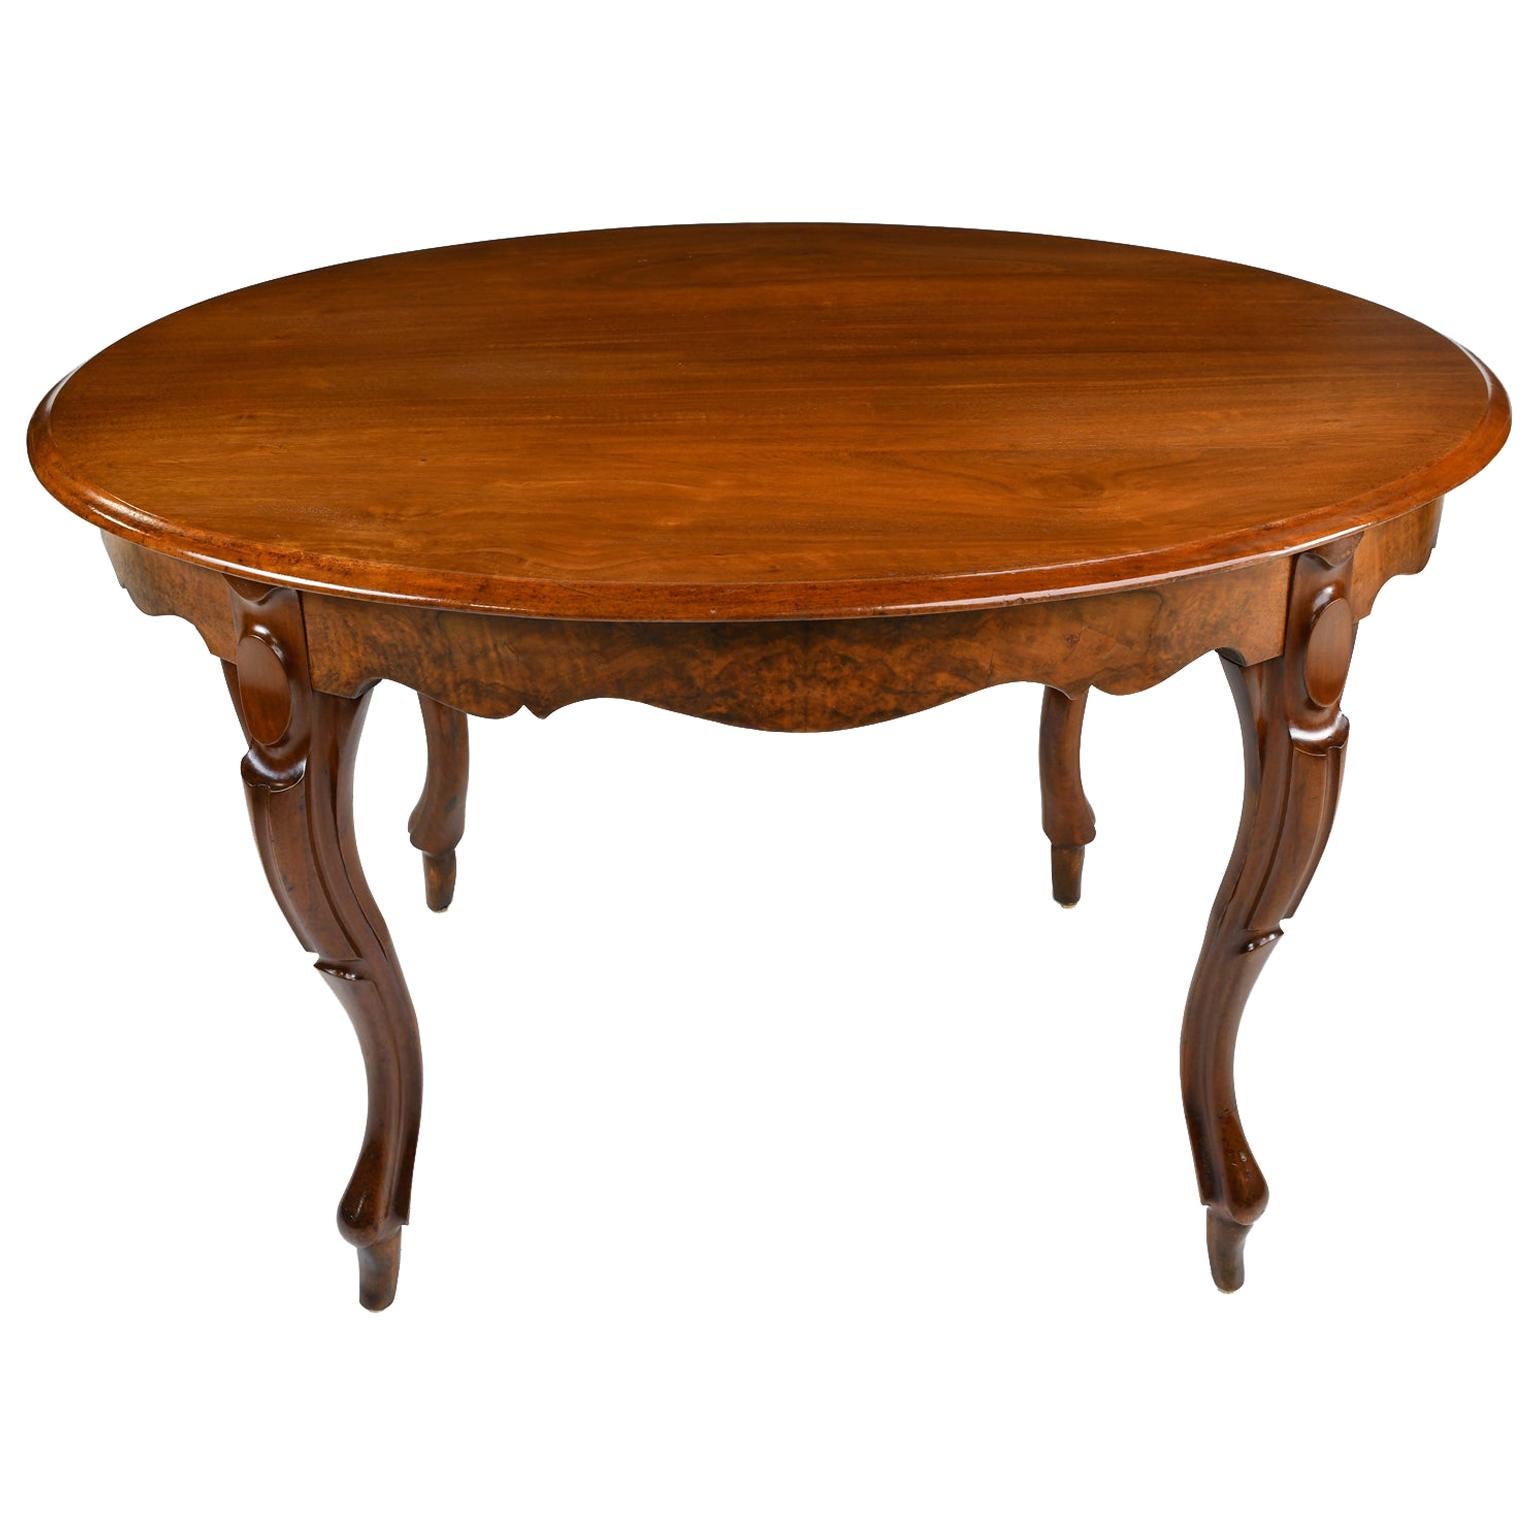 Antique French Louis Philippe Oval Dining/ Center Table in Mahogany, circa 1840